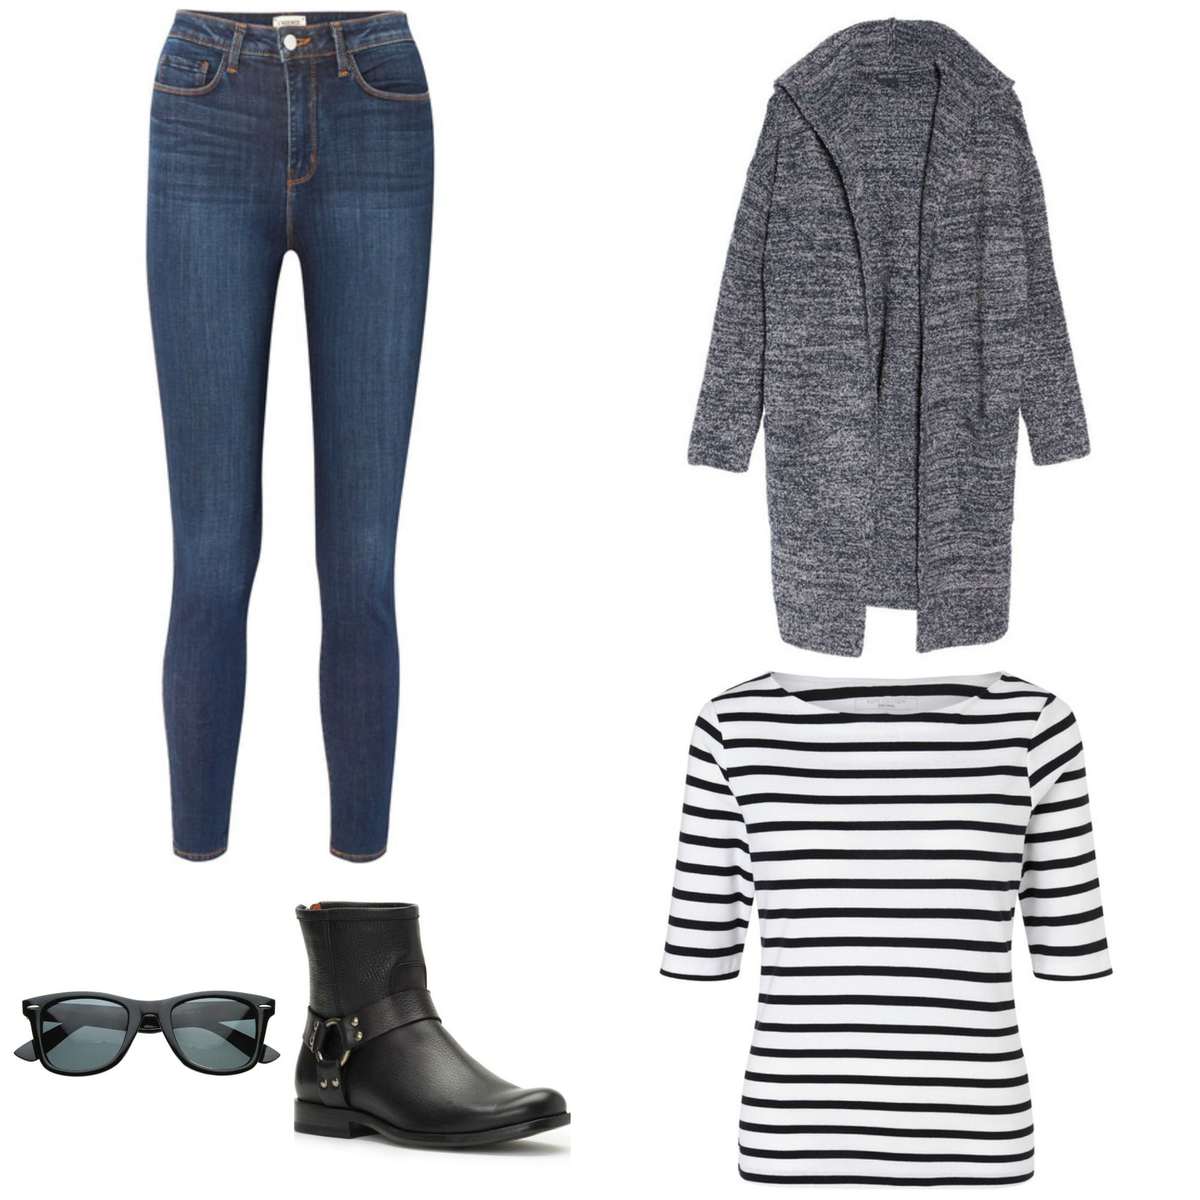 Capsule wardrobe for the work at home woman featuring a Barefoot Dreams chenille cardigan, Breton top, skinny stretch jeans, Frye harness boots, and sunglasses